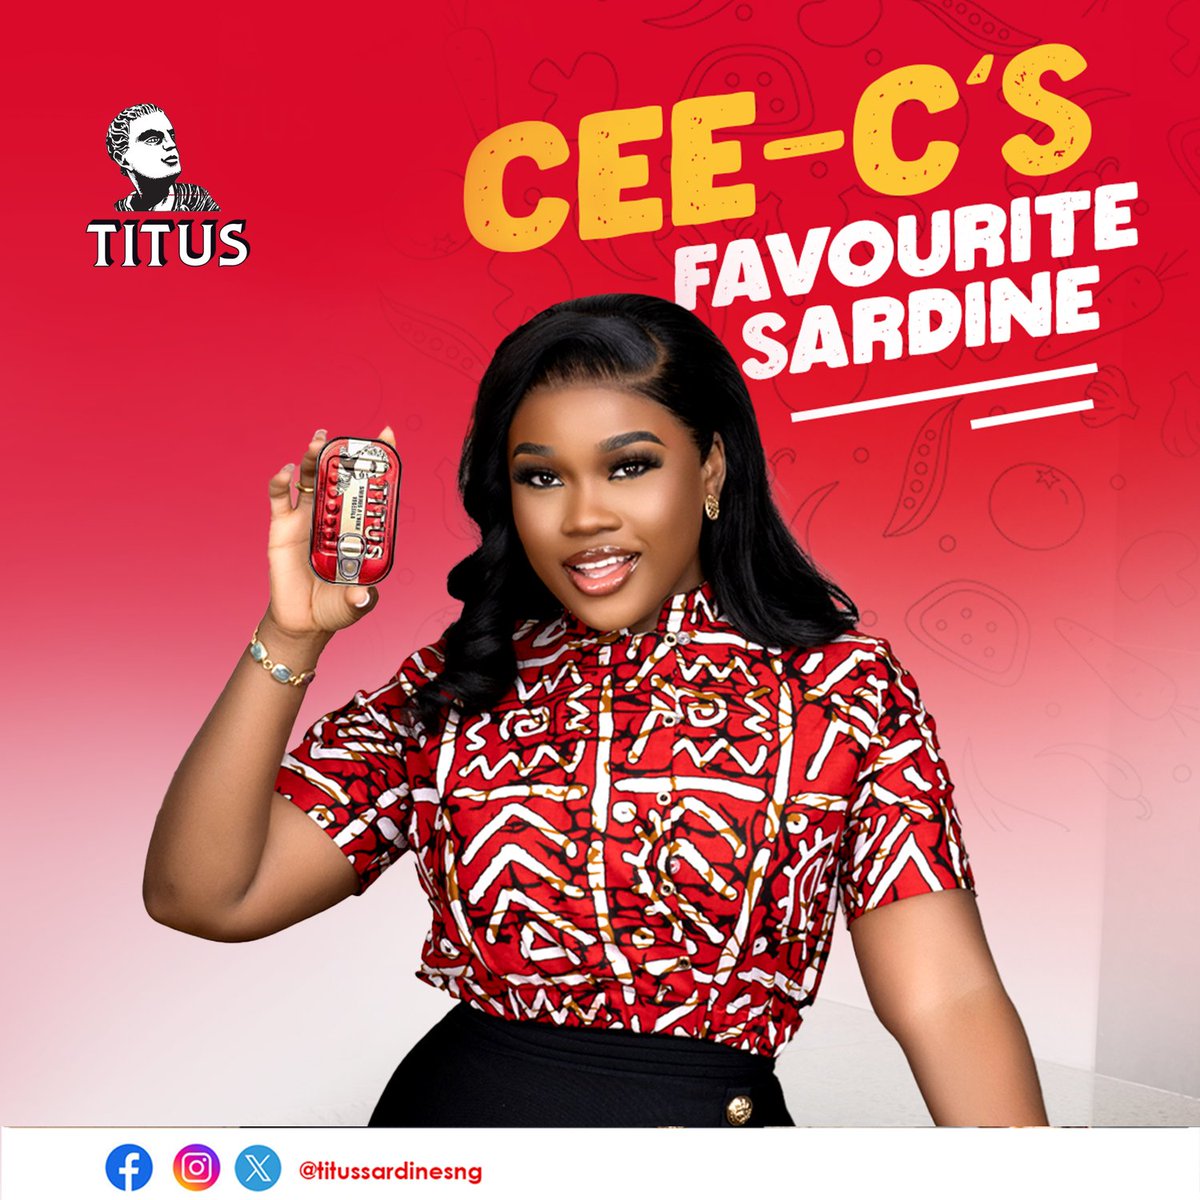 Titus Sardine is our fave’s fave. A premium brand ambassador deserves only premium products.